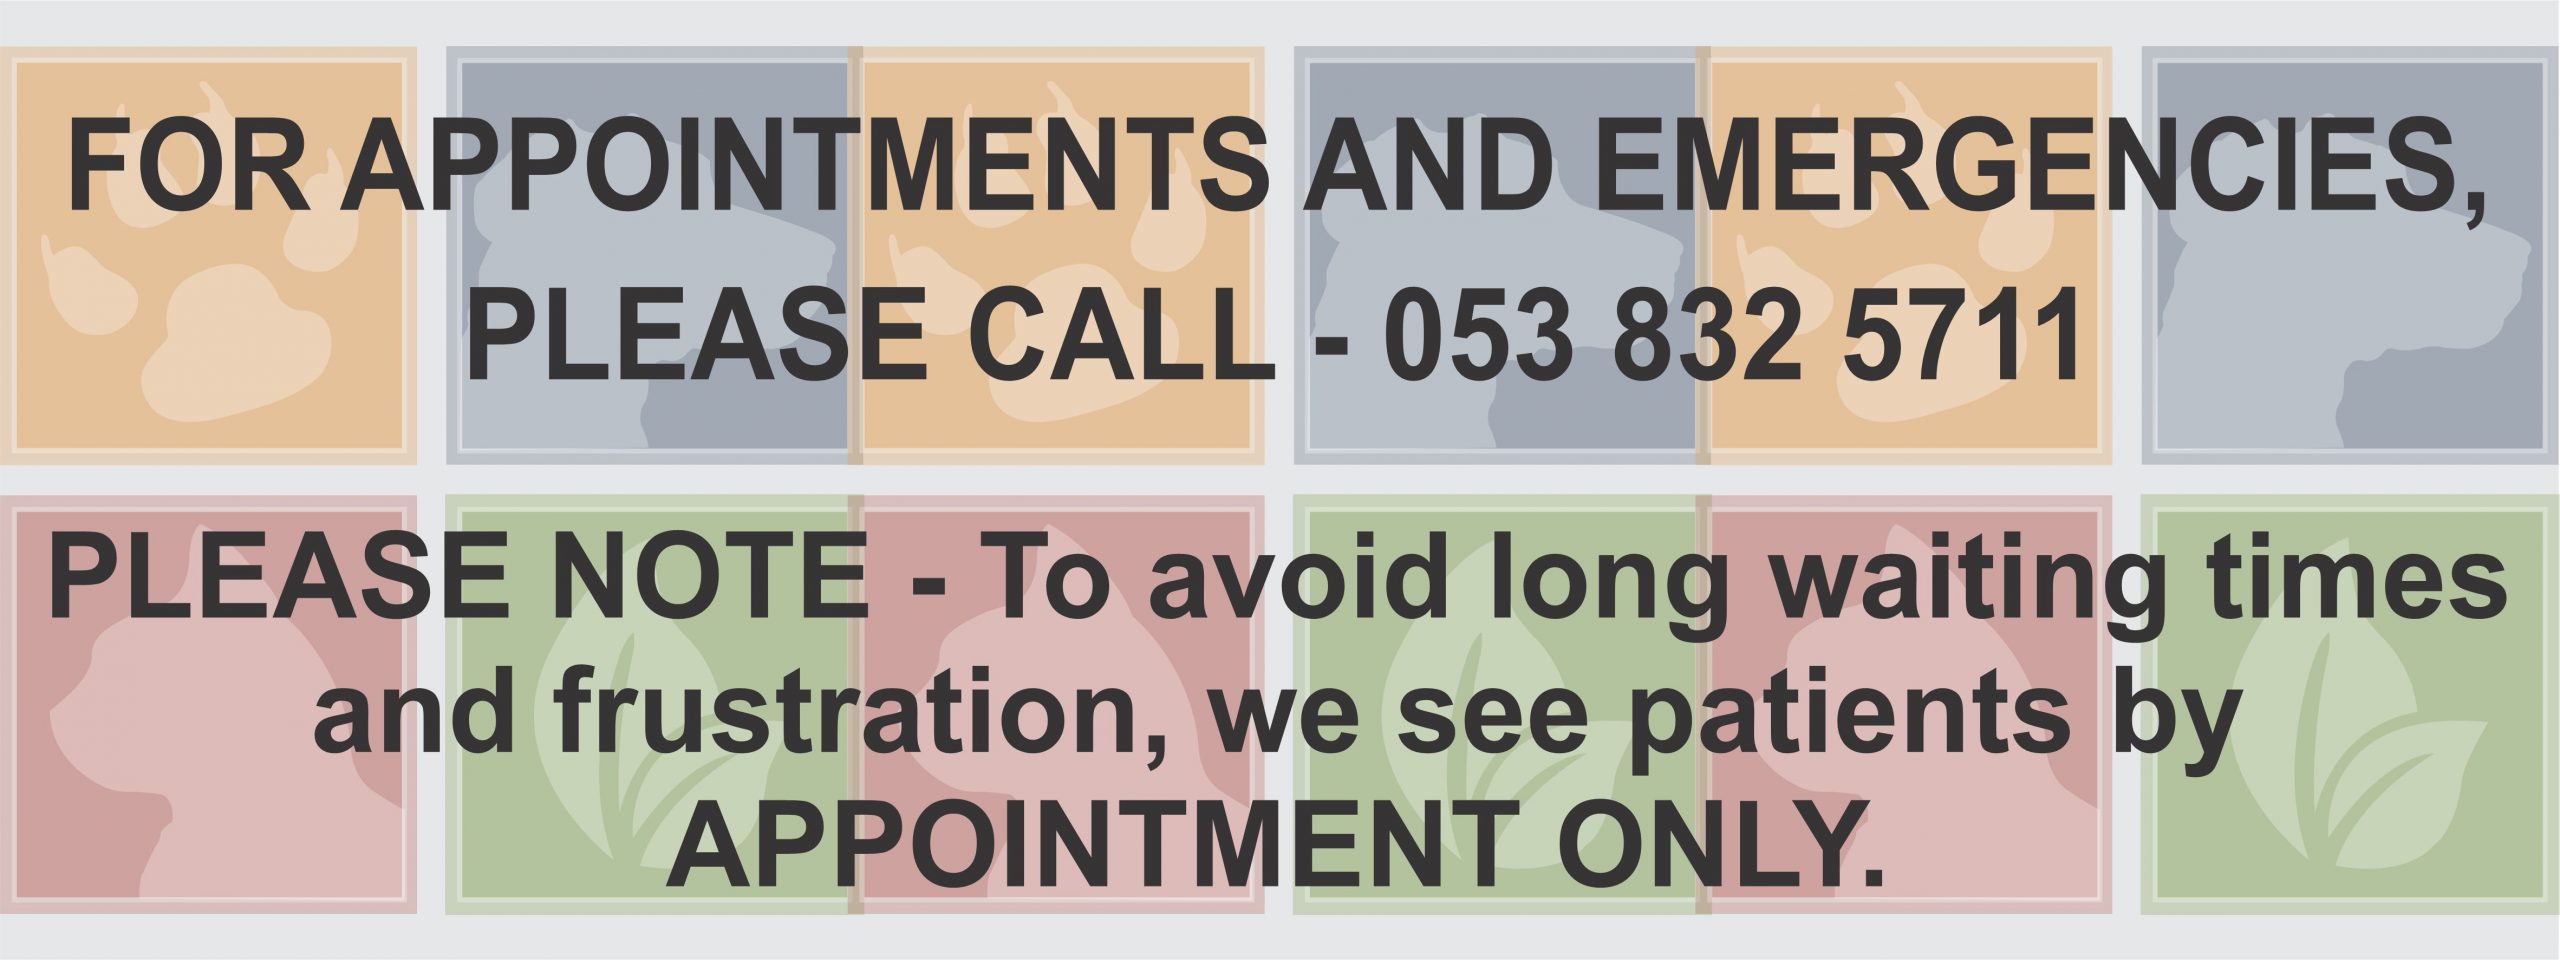 KIMVET Emergencies and Appointment Banner Image - Vet near me